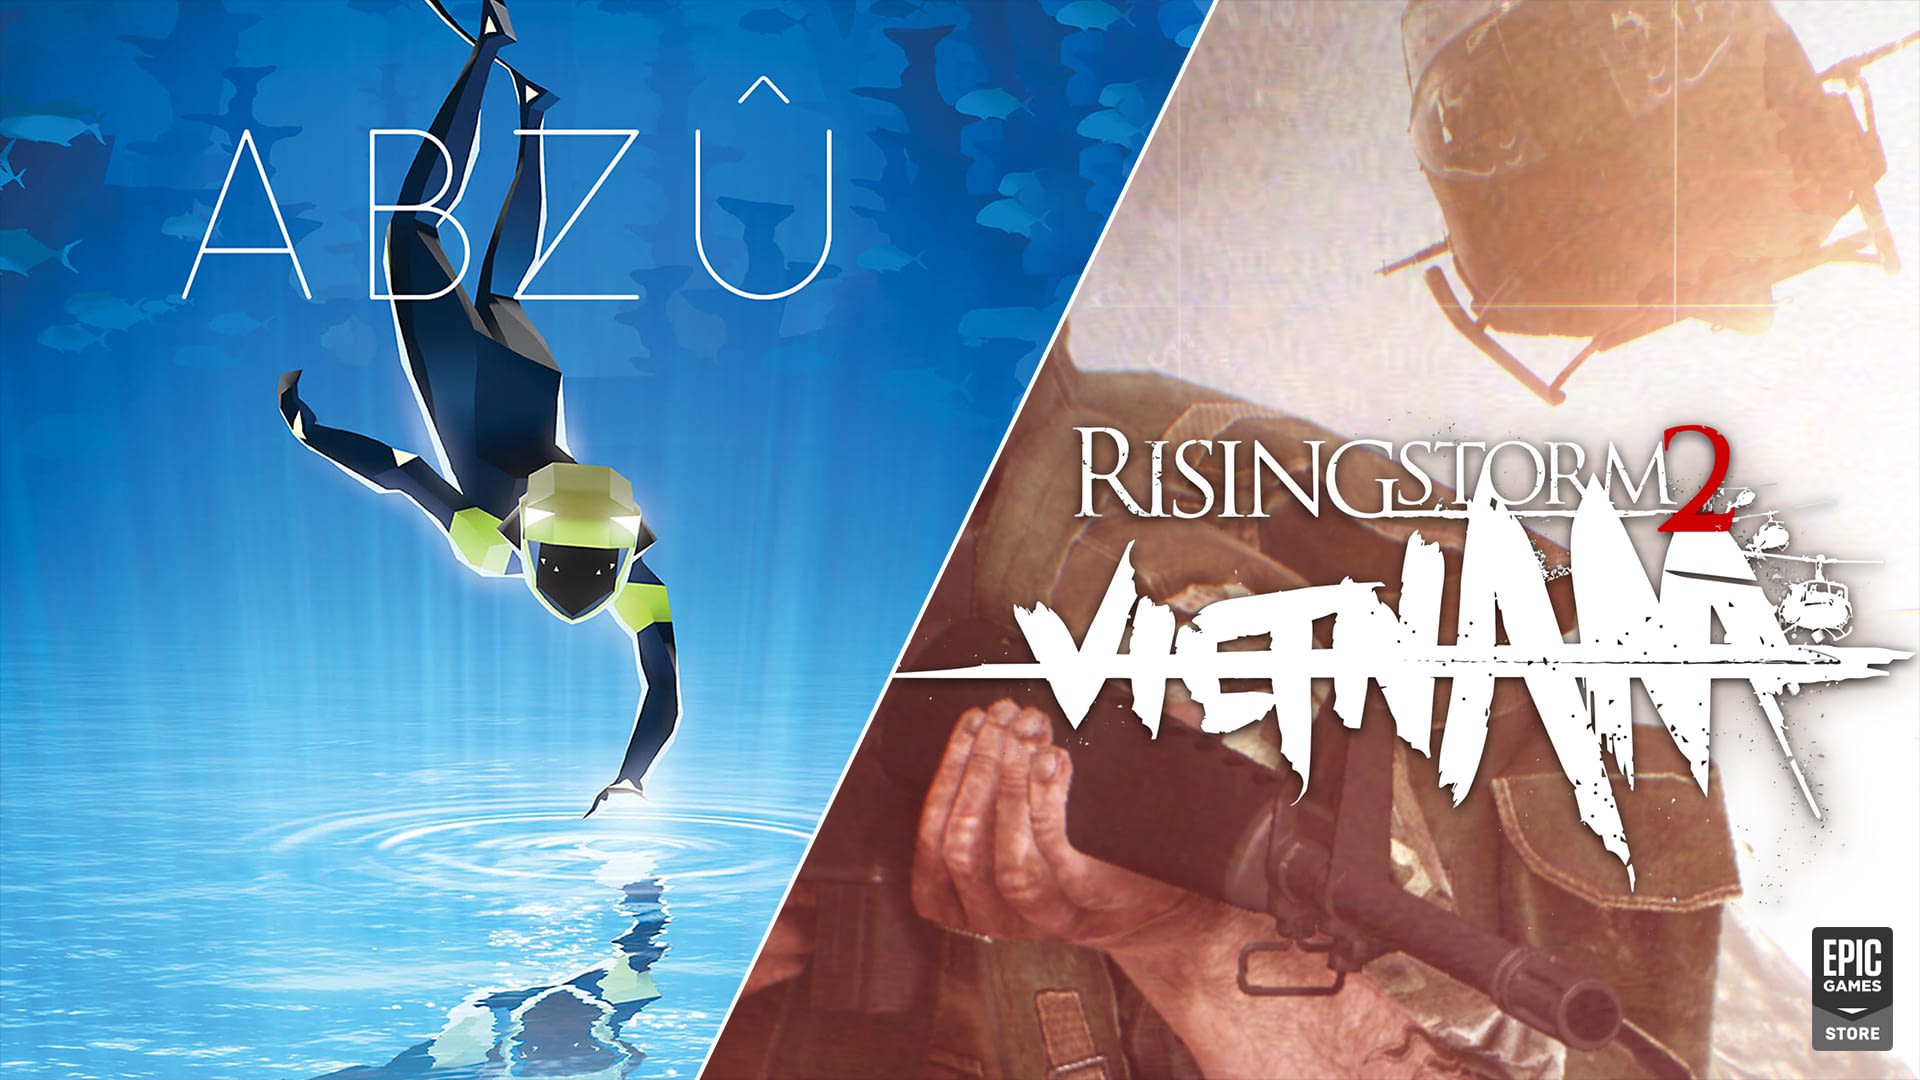 Abzu Rising Storm 2 Vietnam Free For Grabs On The Epic Games Store Gamezone